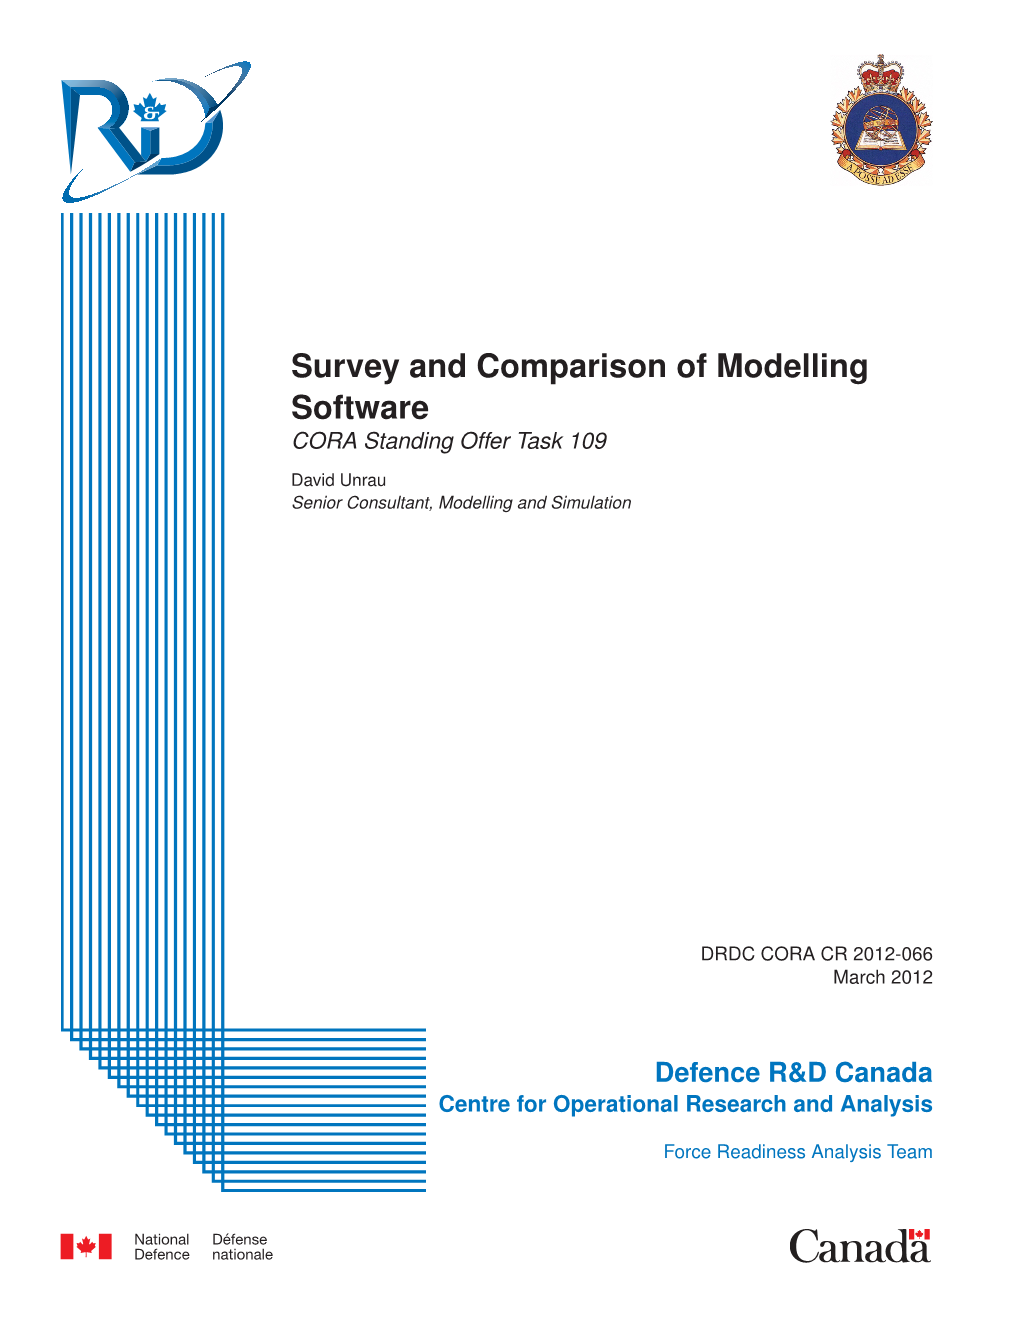 Survey and Comparison of Modelling Software CORA Standing Offer Task 109